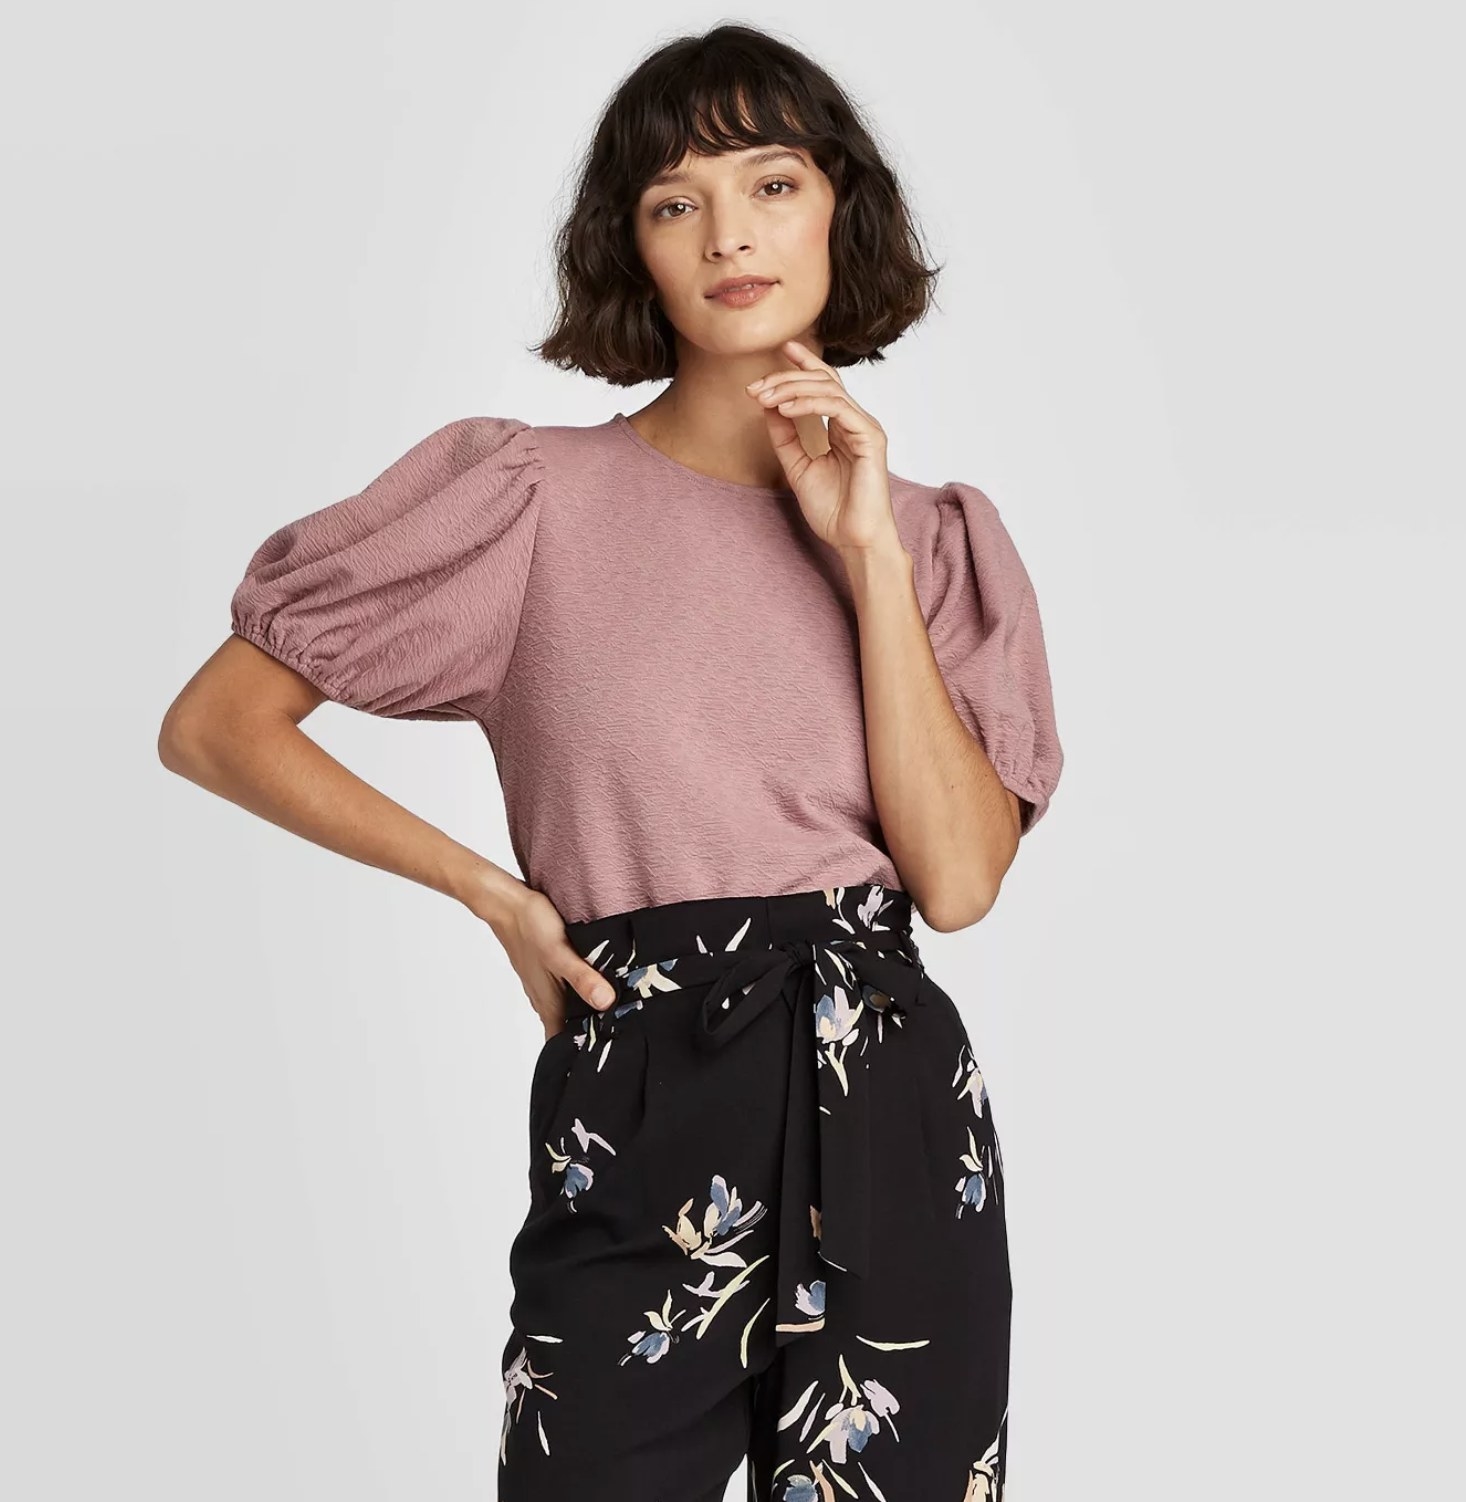 Model poses in rose colored tee and patterned flowy pants. 